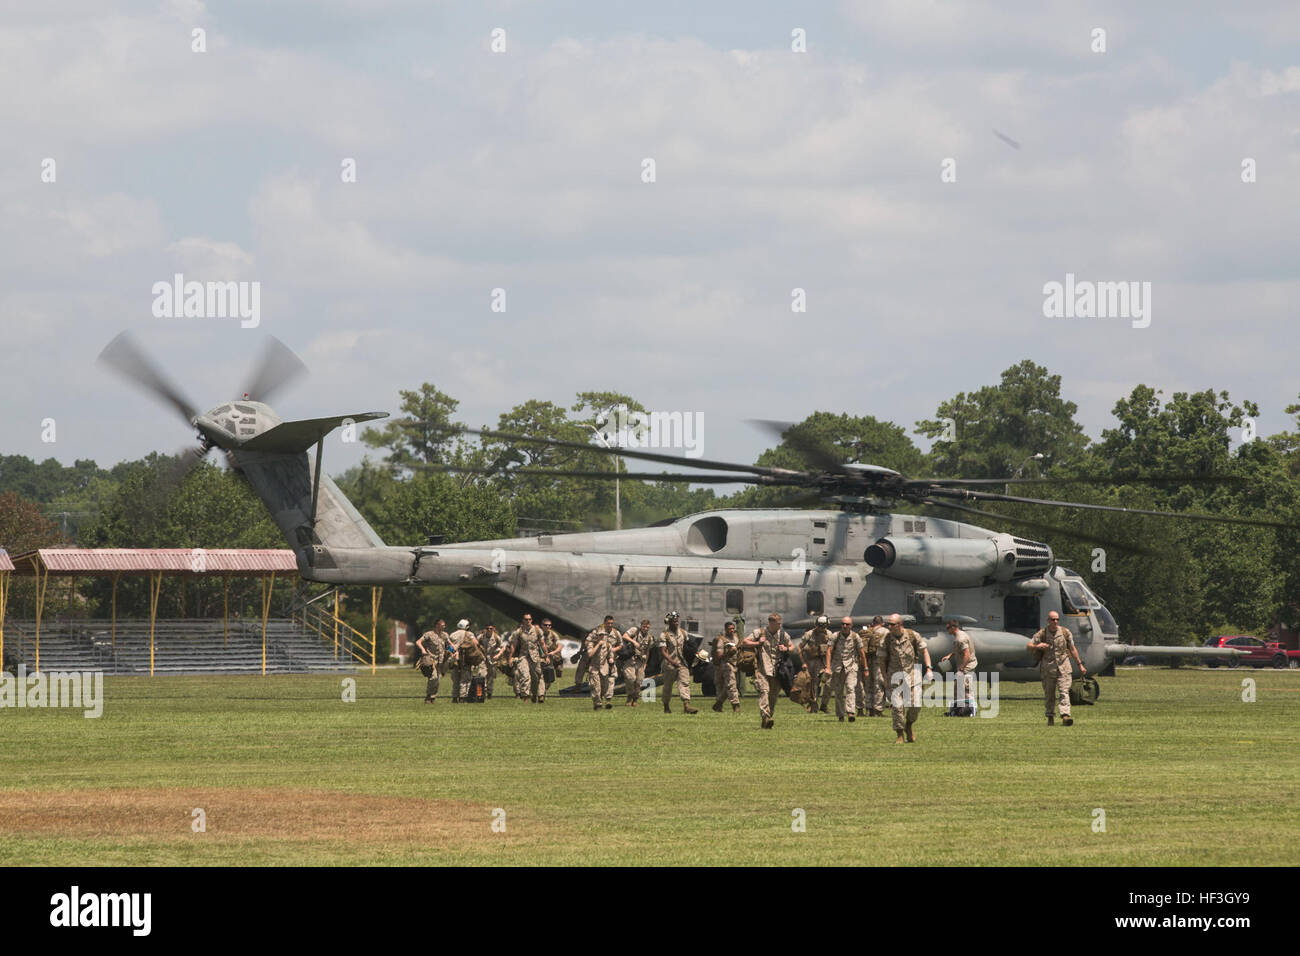 Marines with the 24th Marine Expeditionary Unit offload from a CH-53E Super Stallion during the Command Element’s homecoming at Camp Lejeune, N.C., July 17, 2015. Marines and Sailors of the 24th MEU were embarked on the ships of the Iwo Jima Amphibious Ready Group and supported operations in the U.S. 5th and 6th Fleet area of operations. They also took part in numerous theater security cooperation exercises and training with allied partners such as Djibouti, Italy, Oman, Spain, France, Jordan, Israel, United Arab Emirates, Bahrain, Greece, Kuwait, and Saudi Arabia. (U.S. Marine Corps photo by  Stock Photo